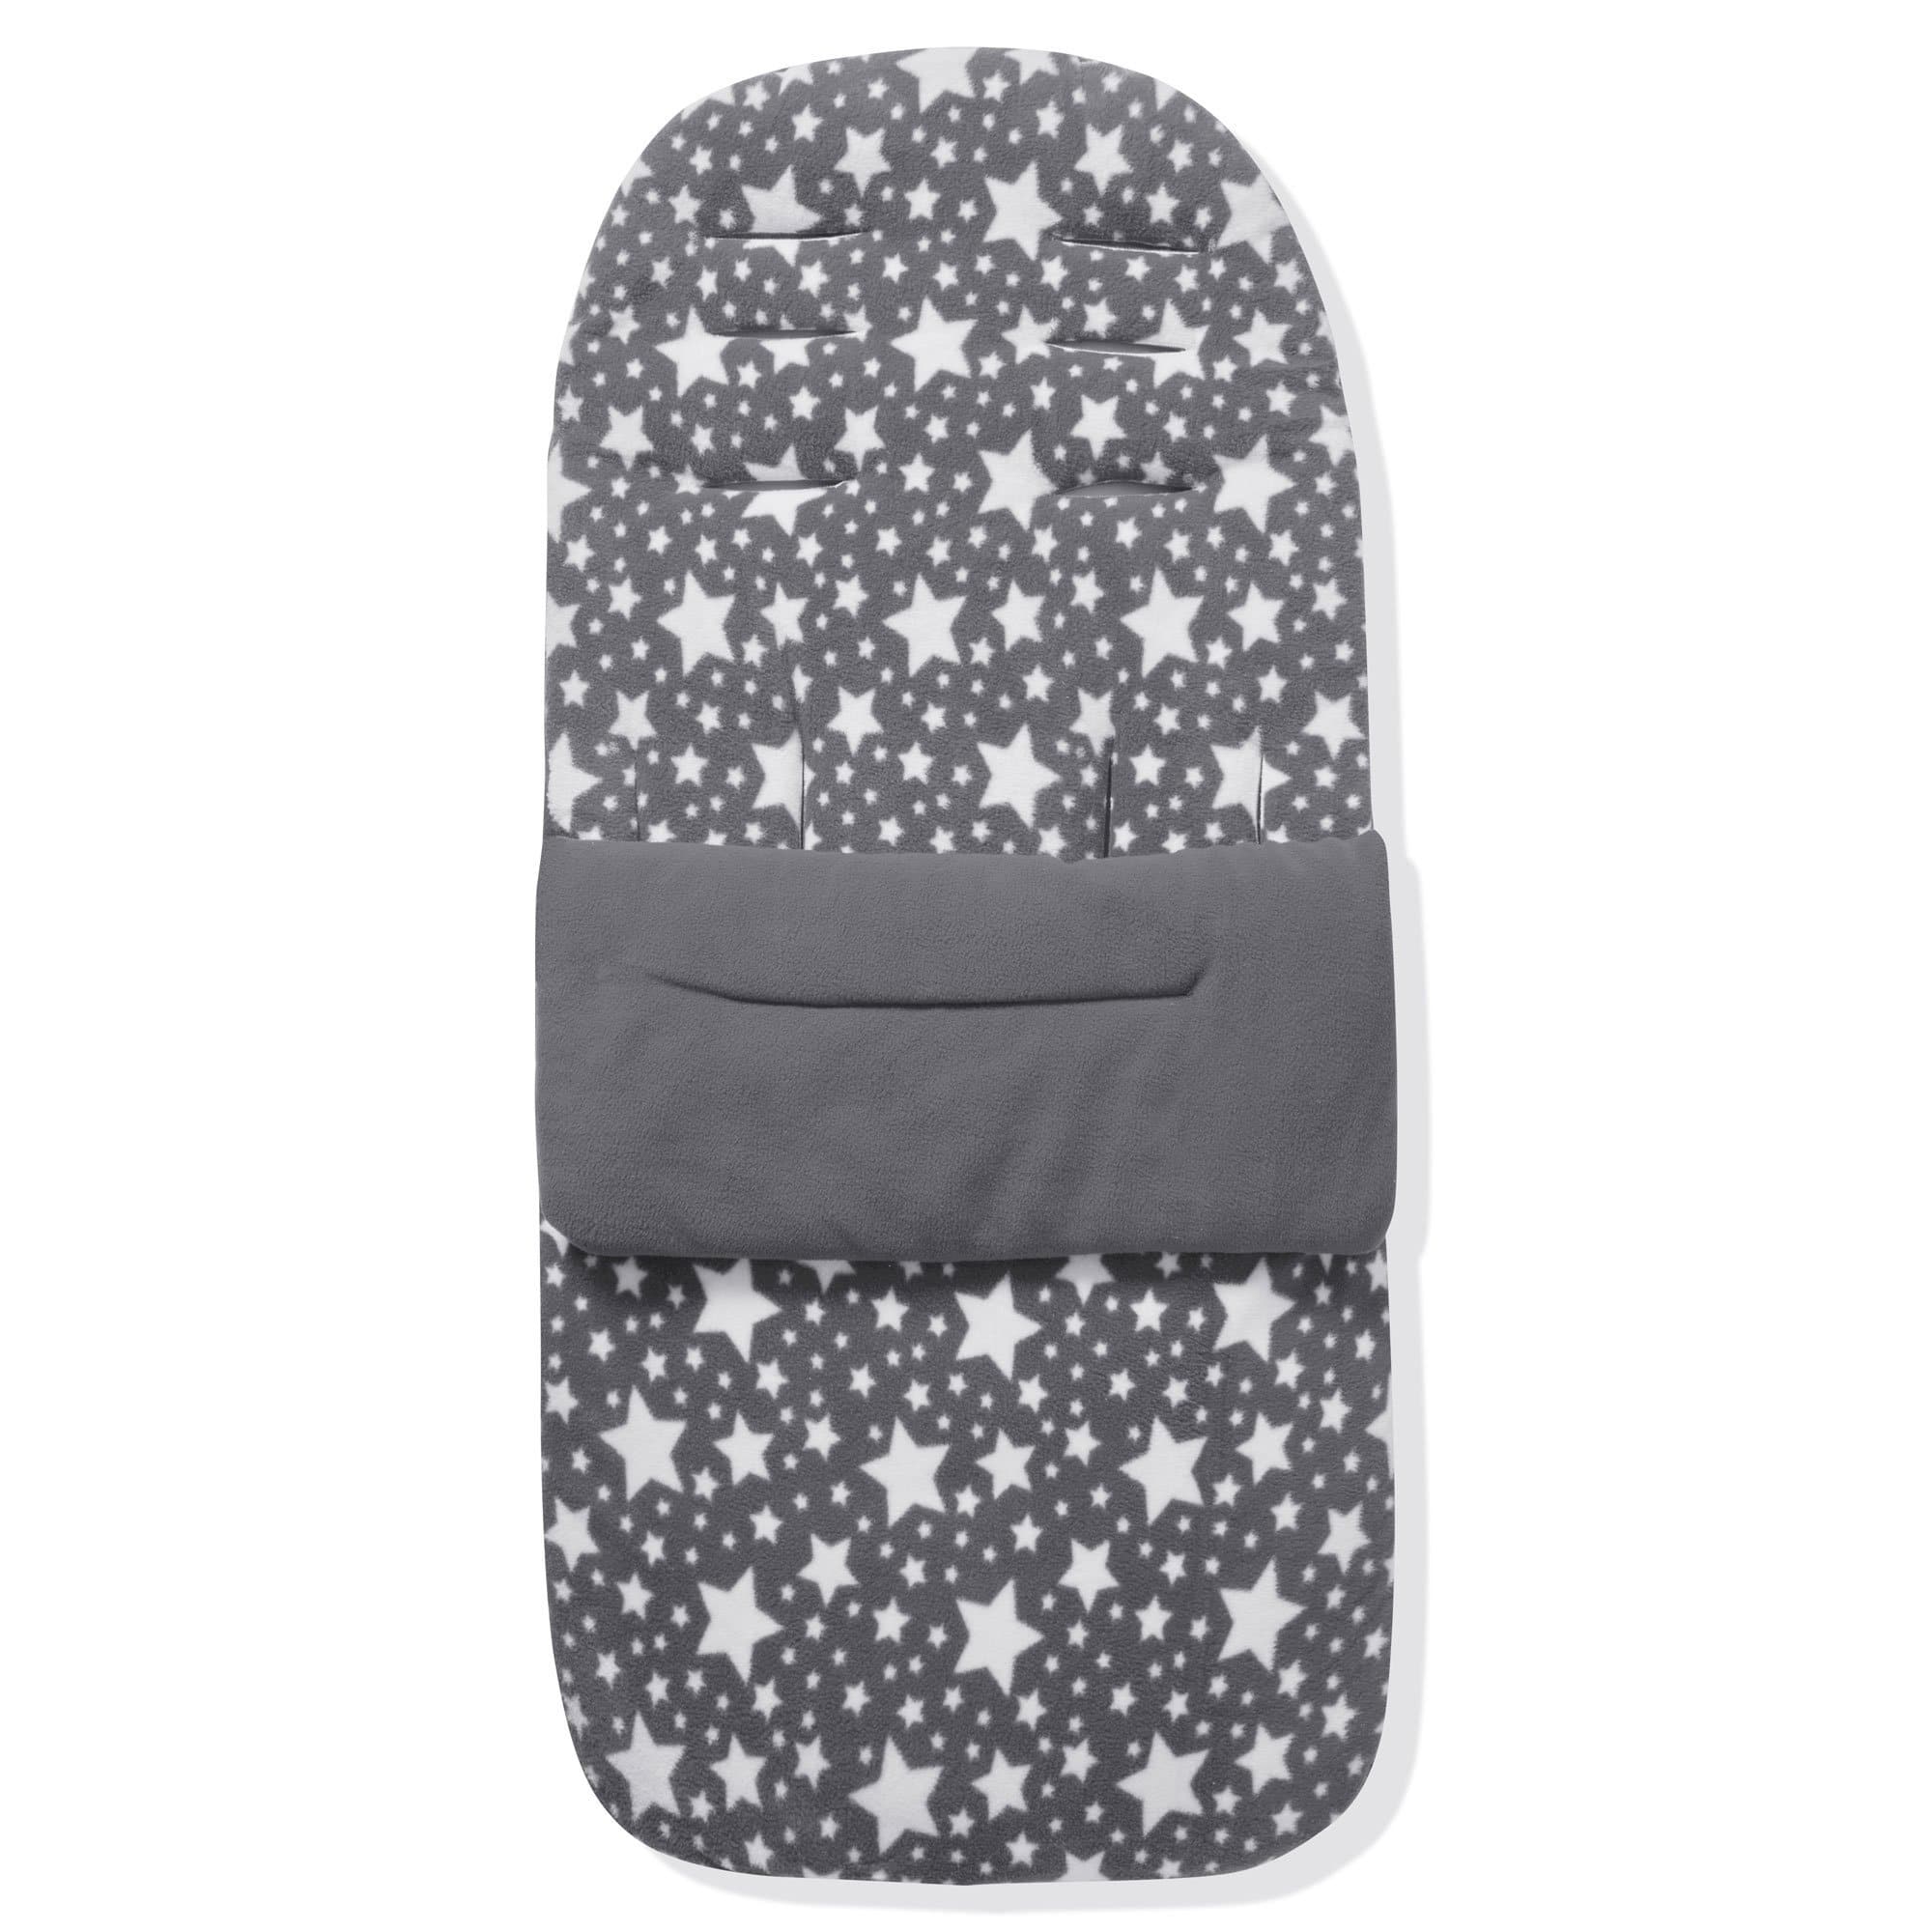 Fleece Footmuff / Cosy Toes Compatible with Maclaren - Grey Star / Fits All Models | For Your Little One